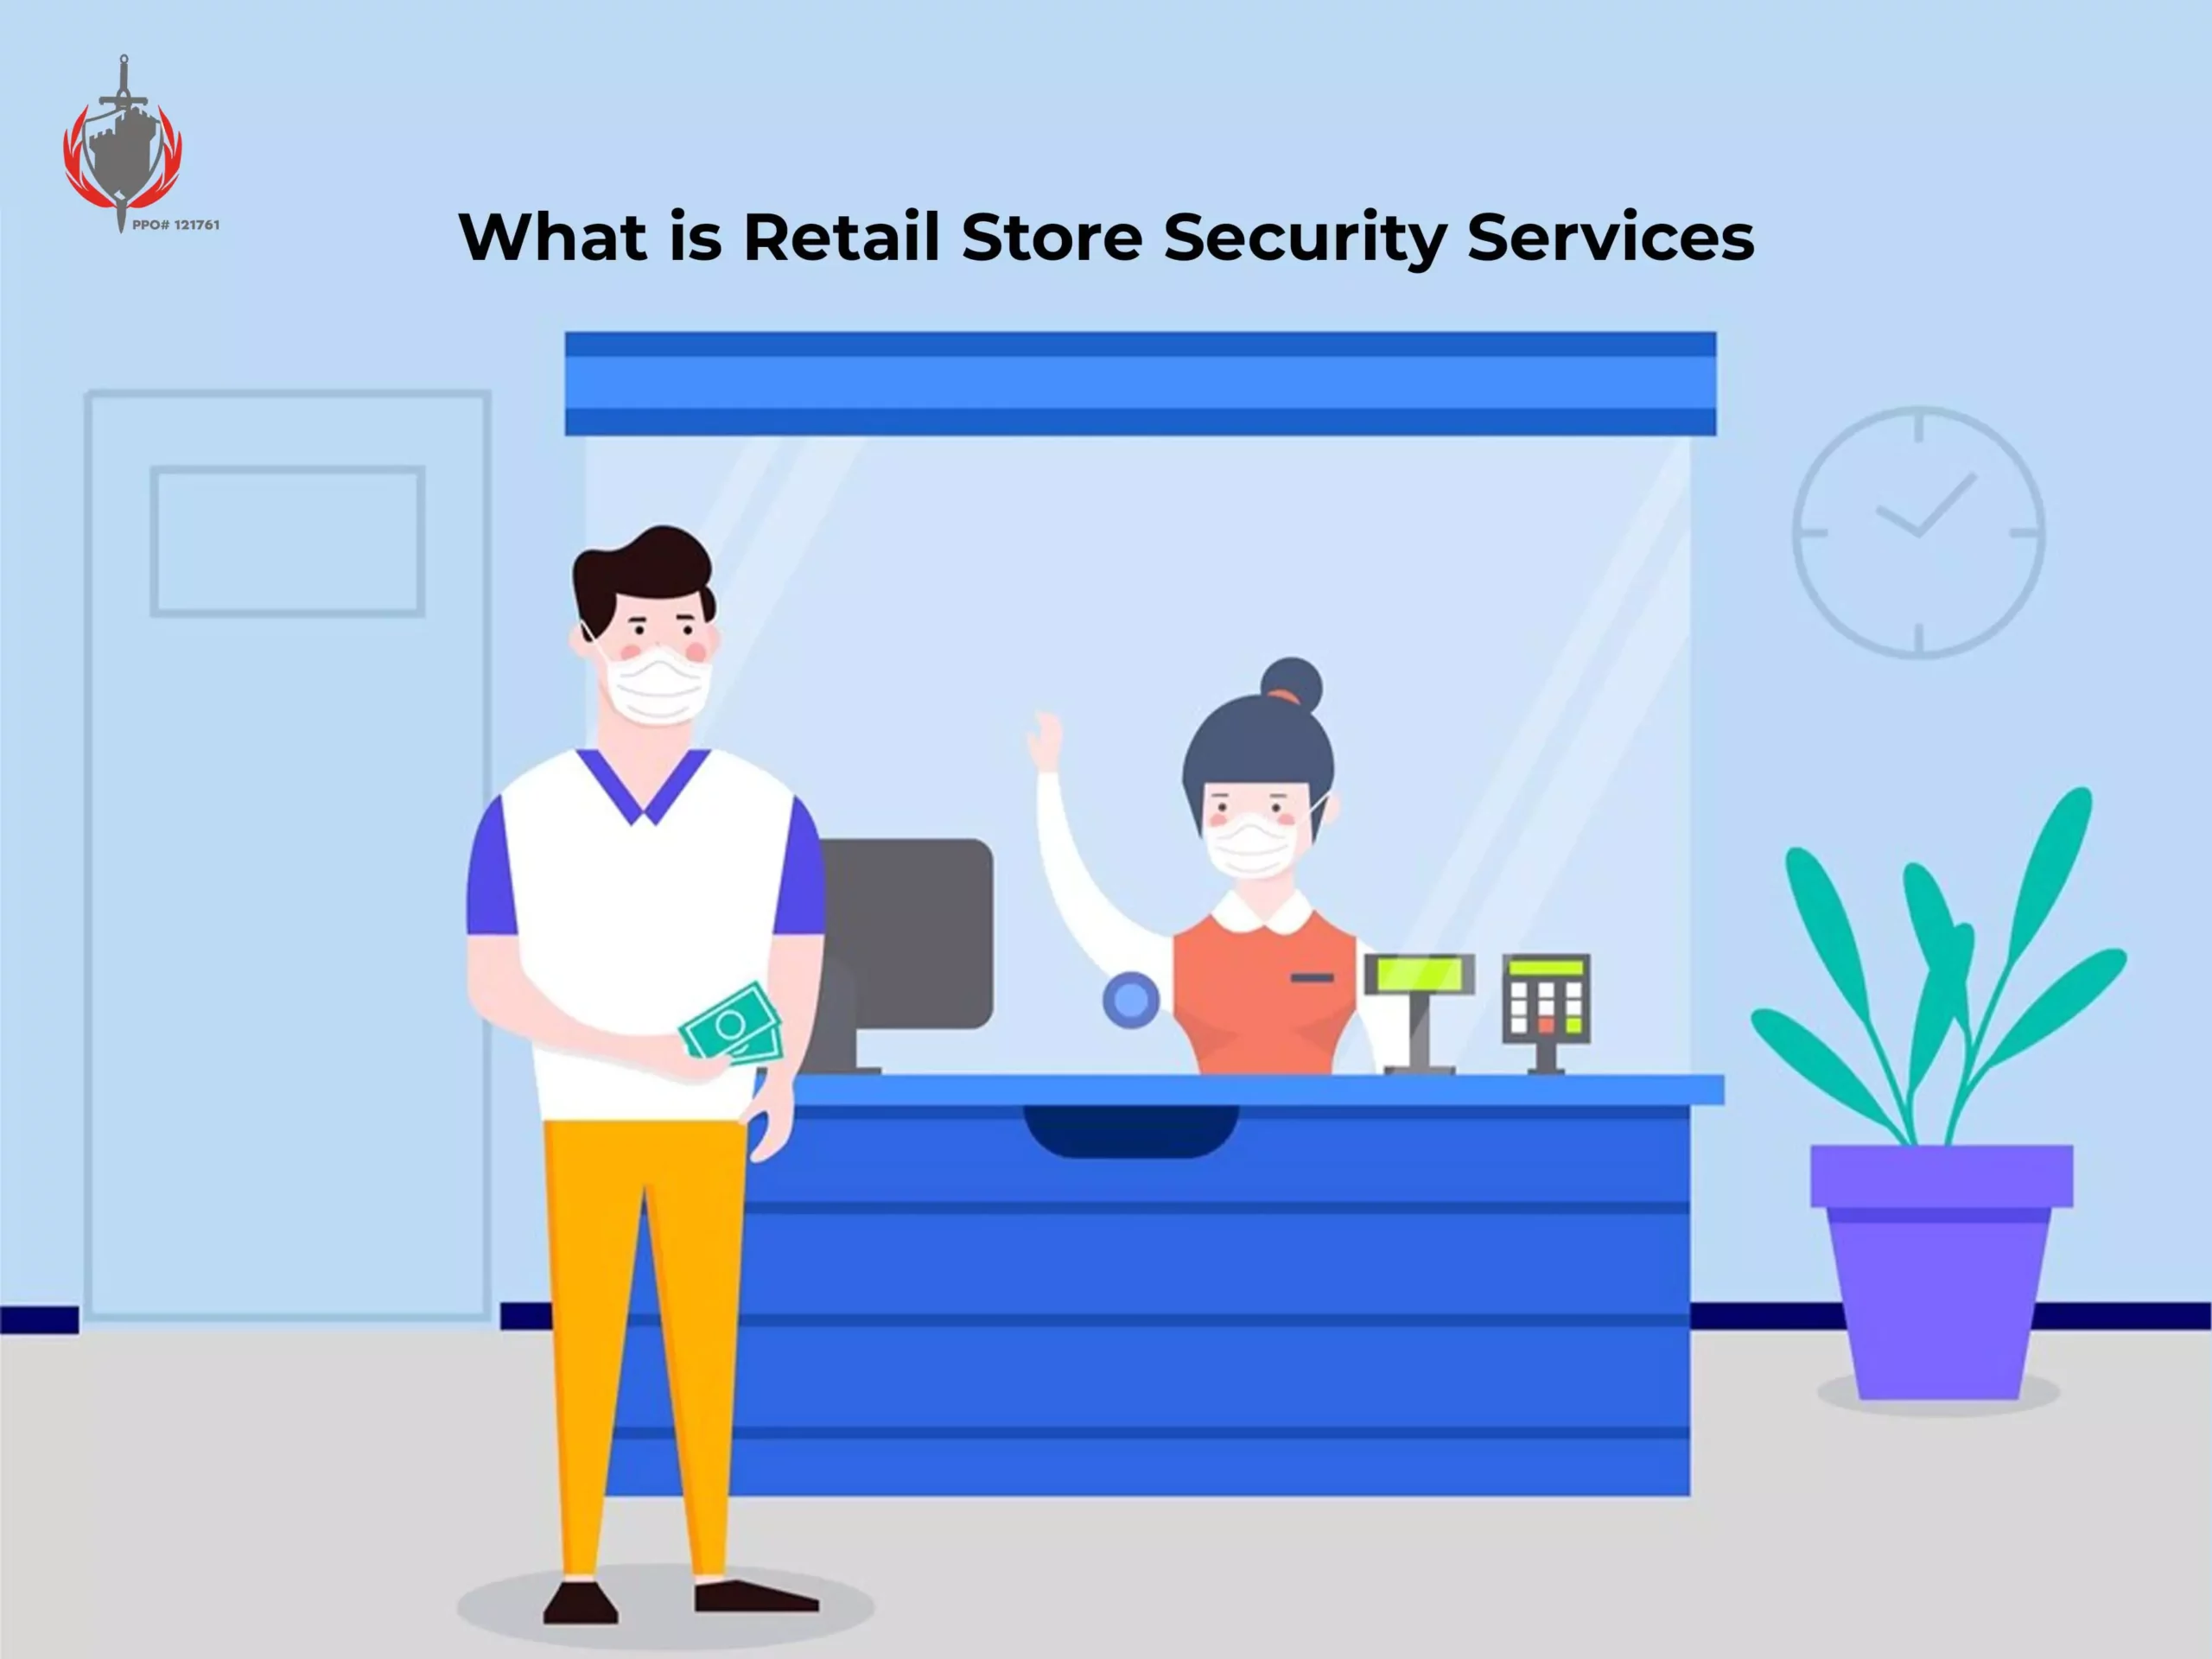 What is Retail Store Security Services